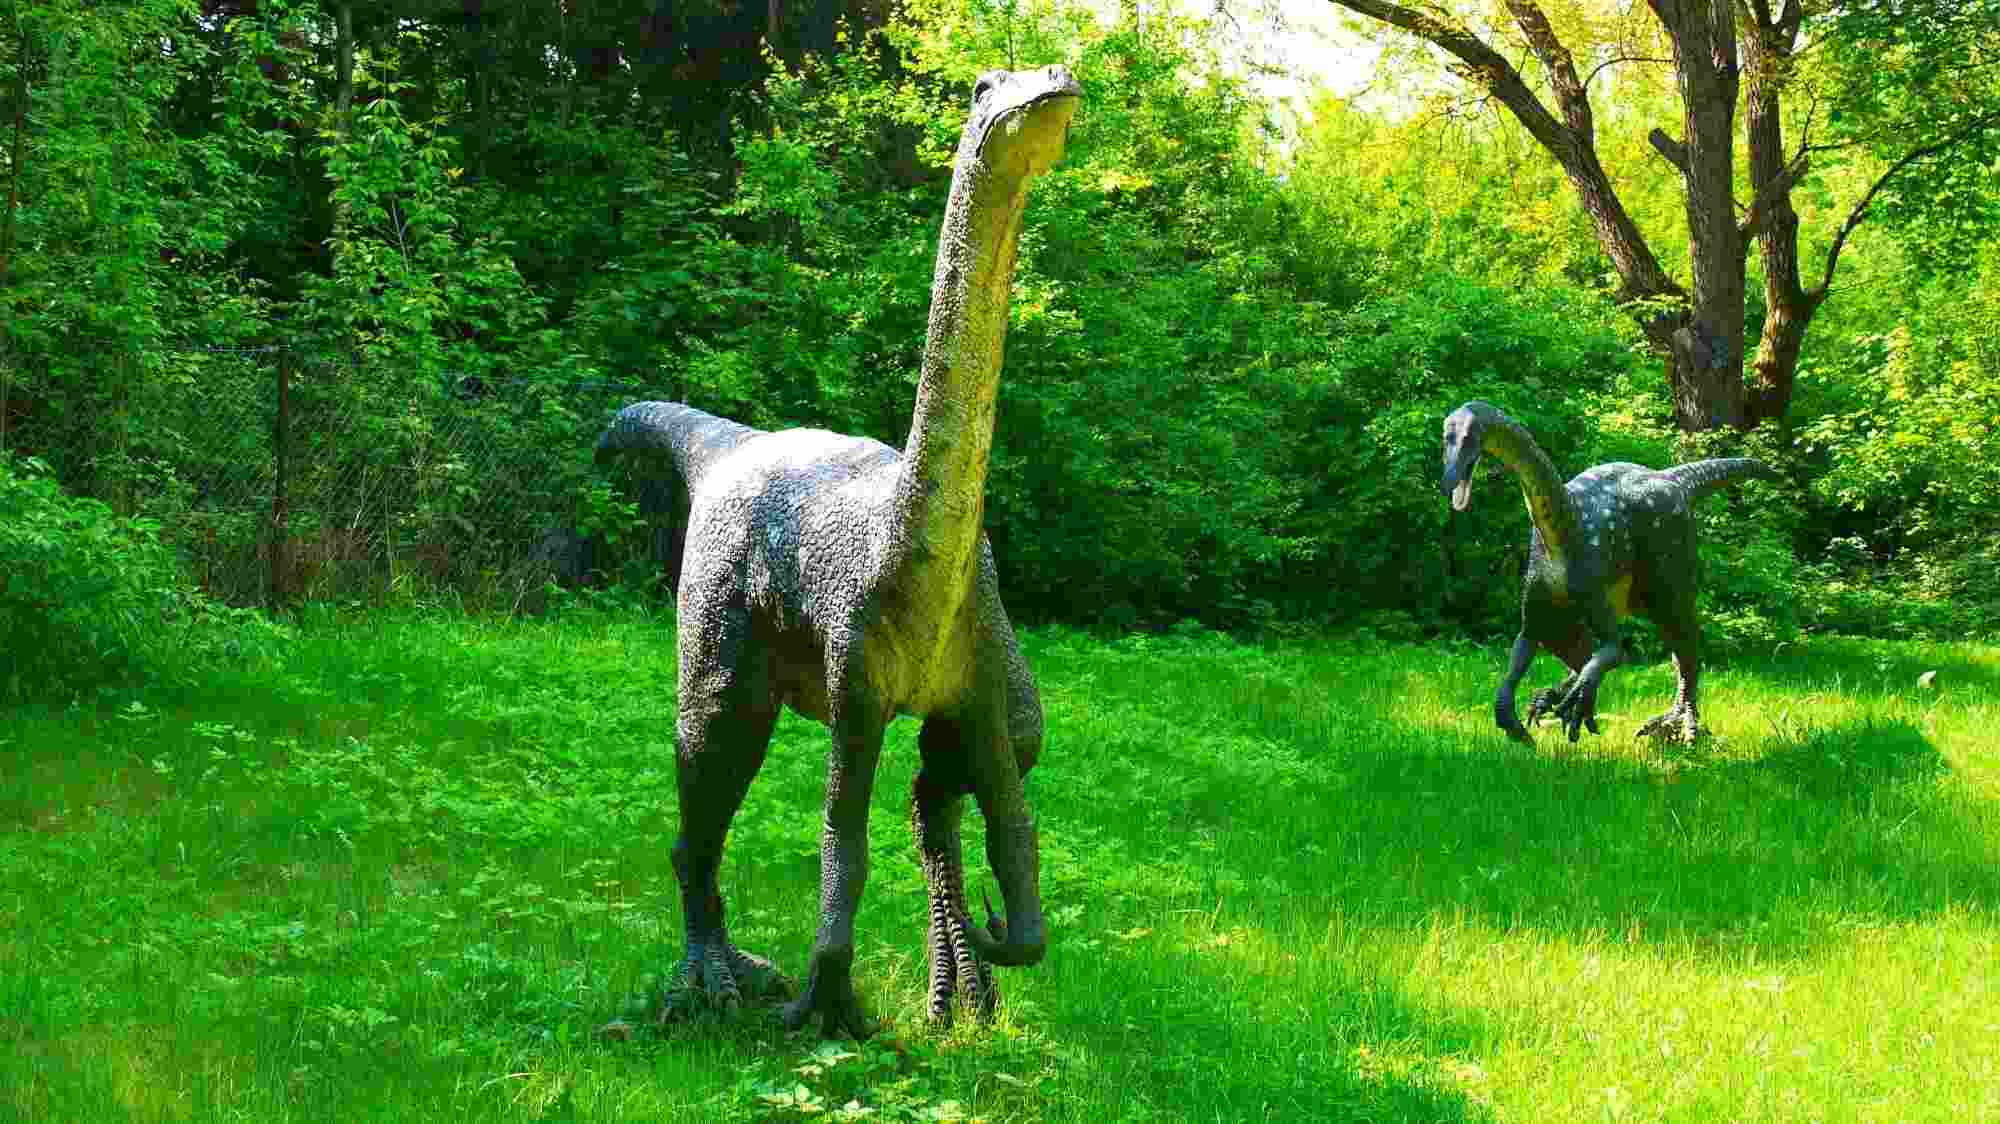 The Ornithomimus facts about its habitat, size and life.